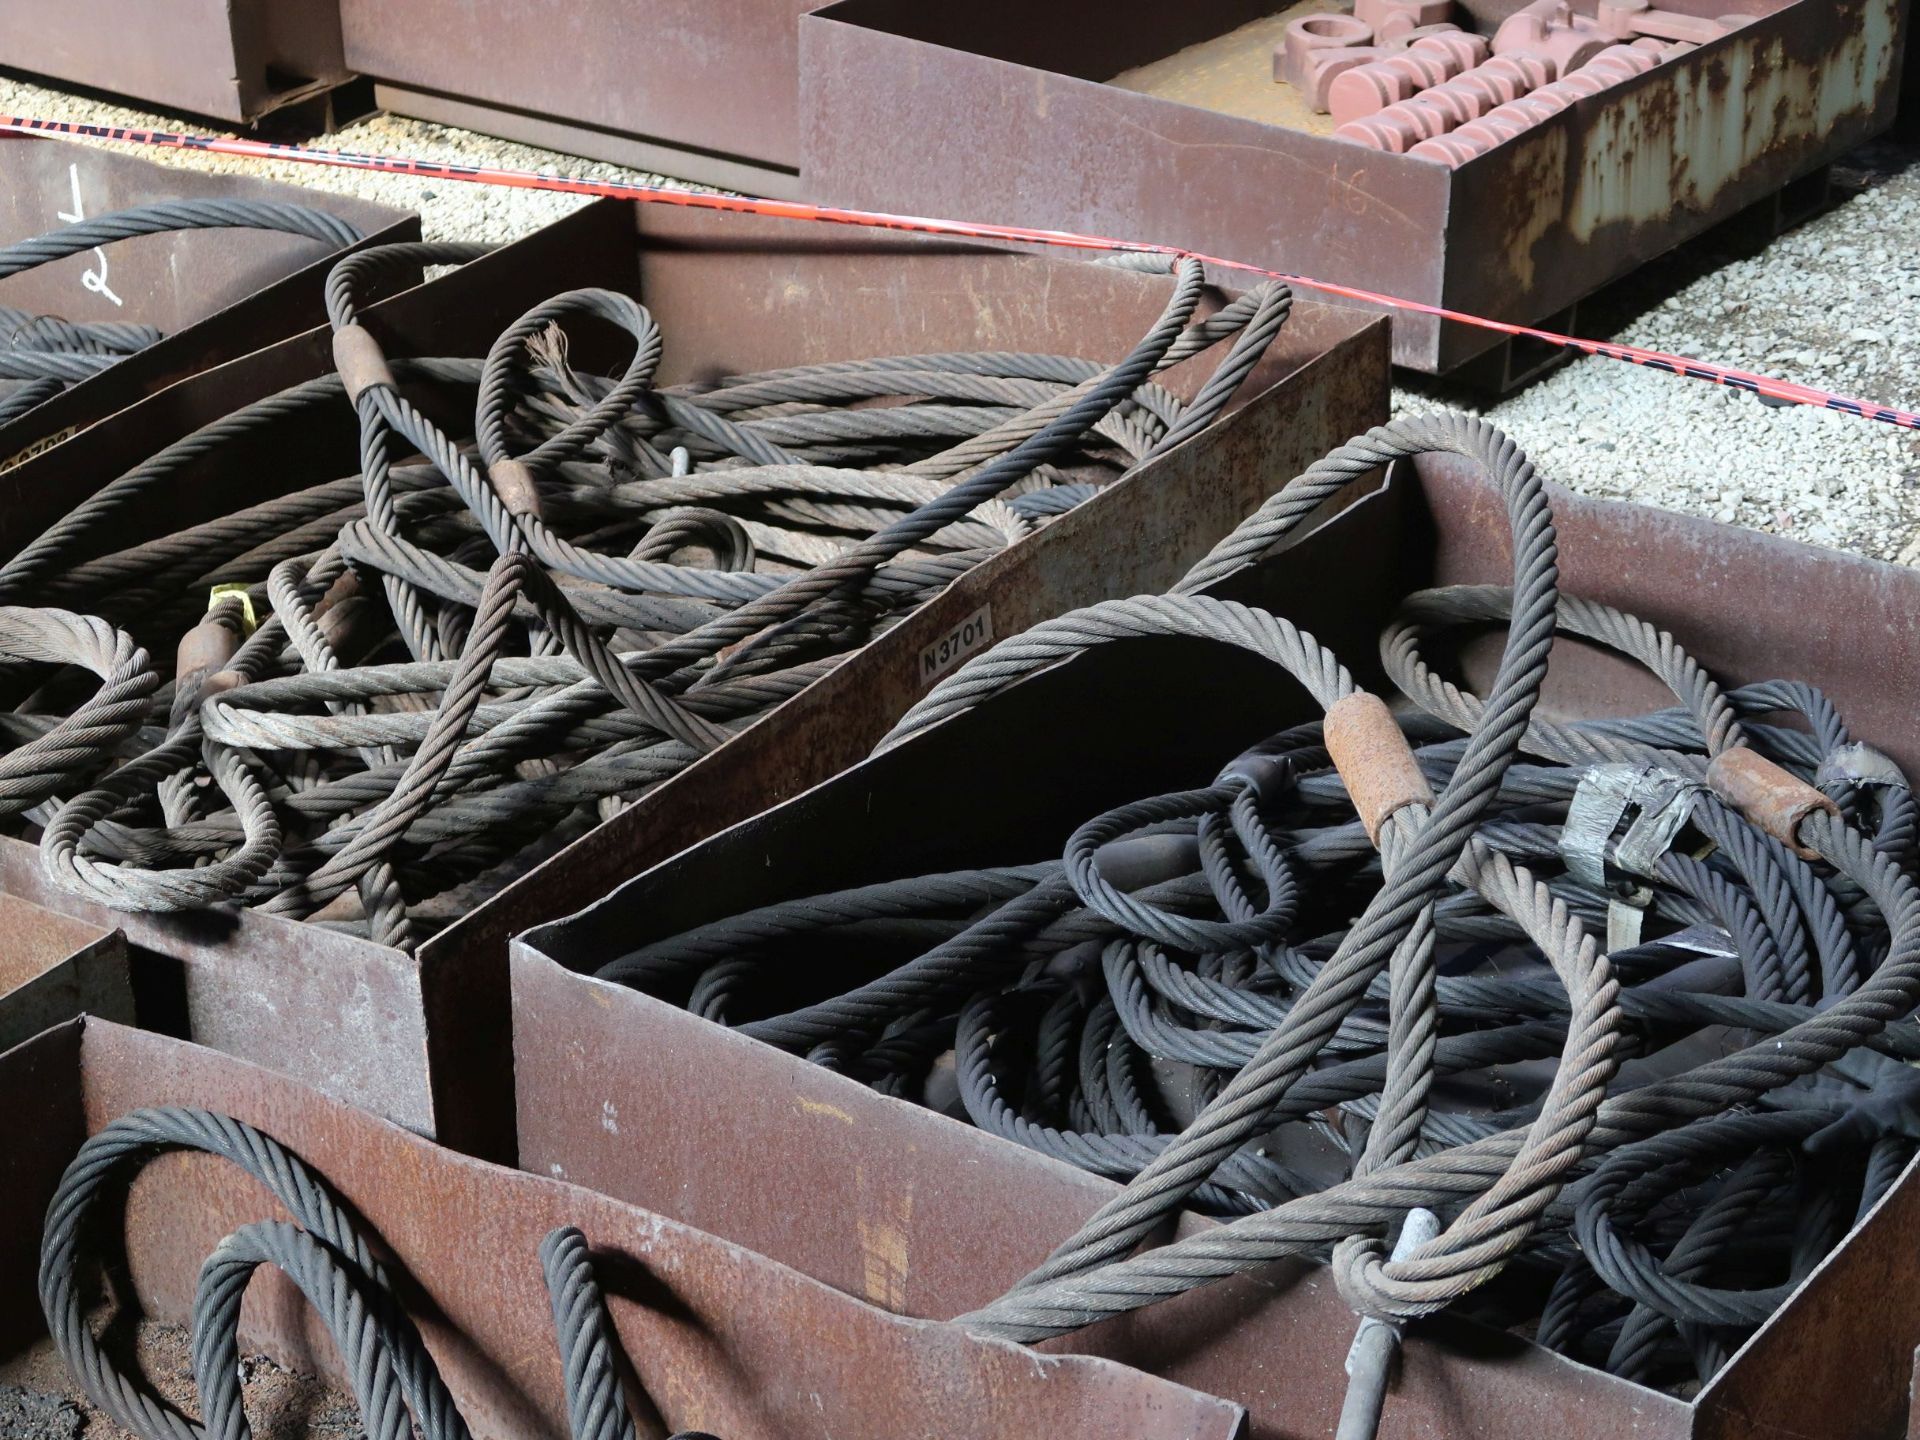 (LOT) LARGE QUANTITY OF STEEL ITEMS - PLATFORMS, BASKETS WITH RIGGING, SLINGS, SHACKLES, AND OTHER - - Image 9 of 10